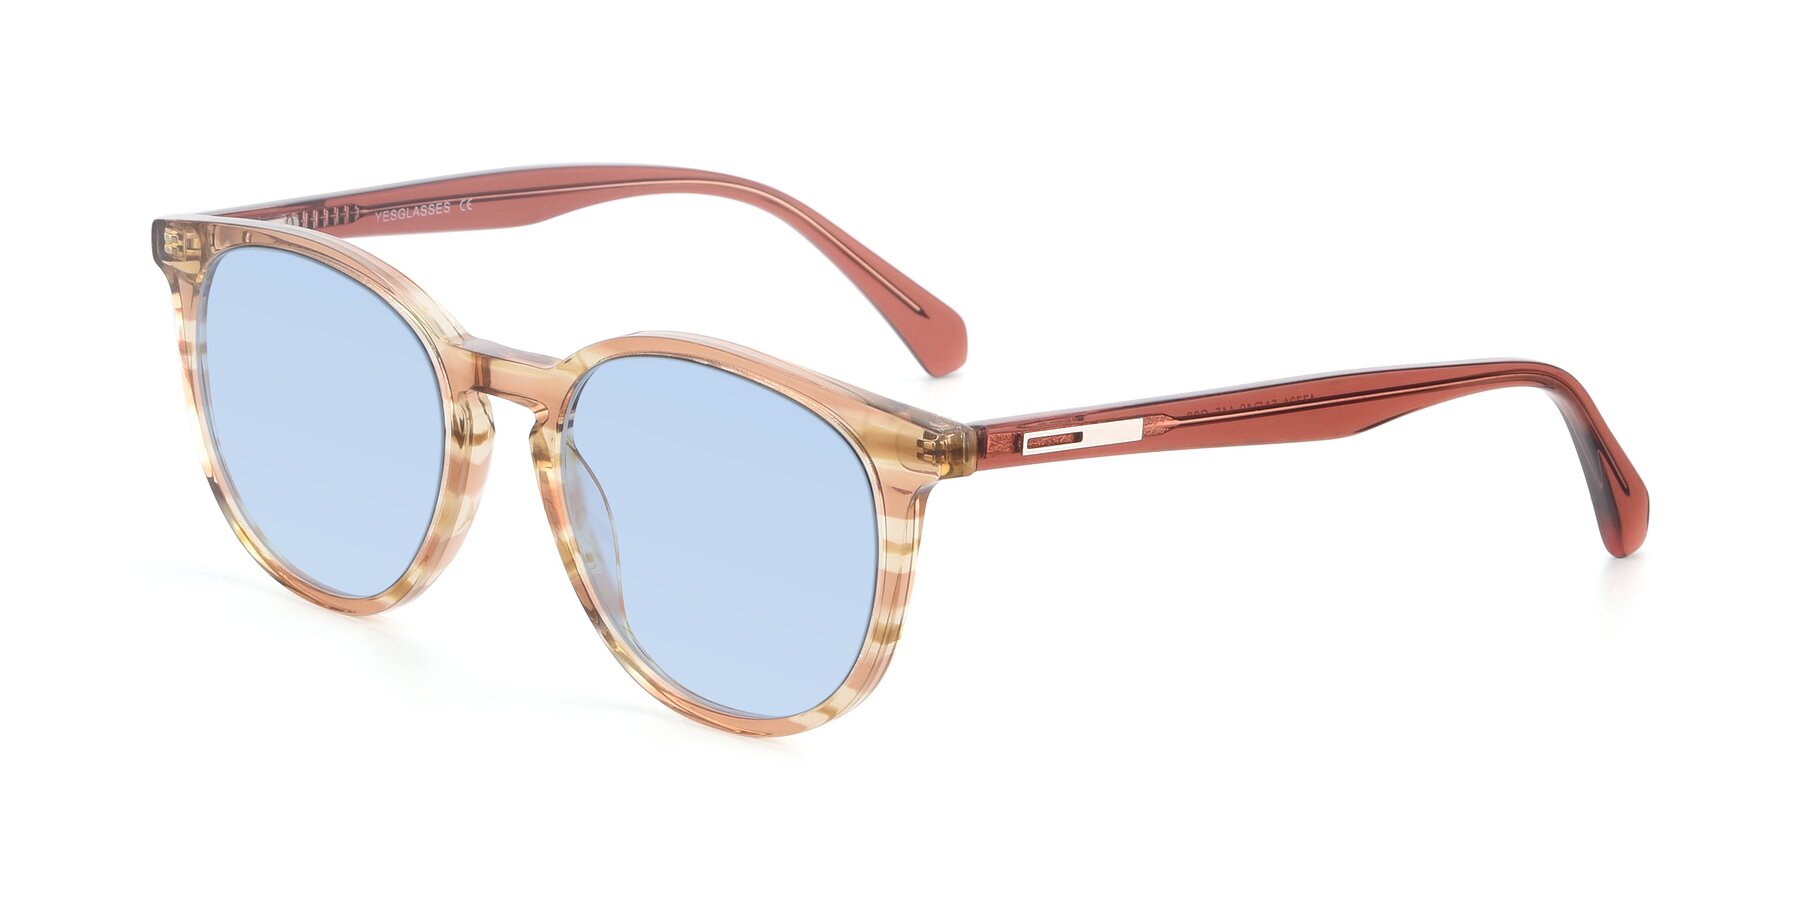 Angle of 17721 in Stripe Caramel with Light Blue Tinted Lenses